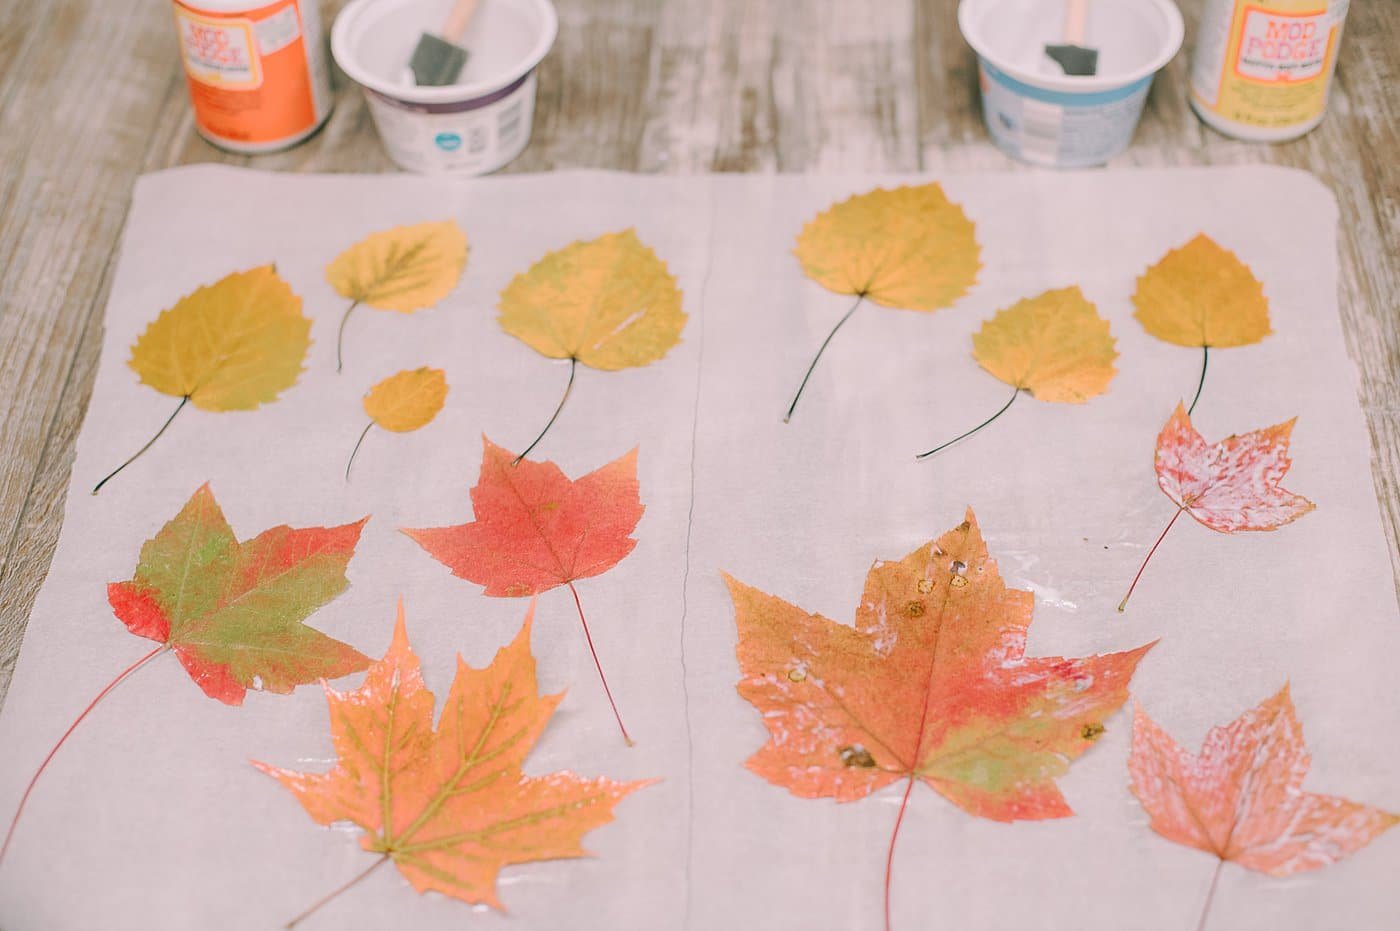 Let the mod podge dry on the leaves before adding a layer to the back side.